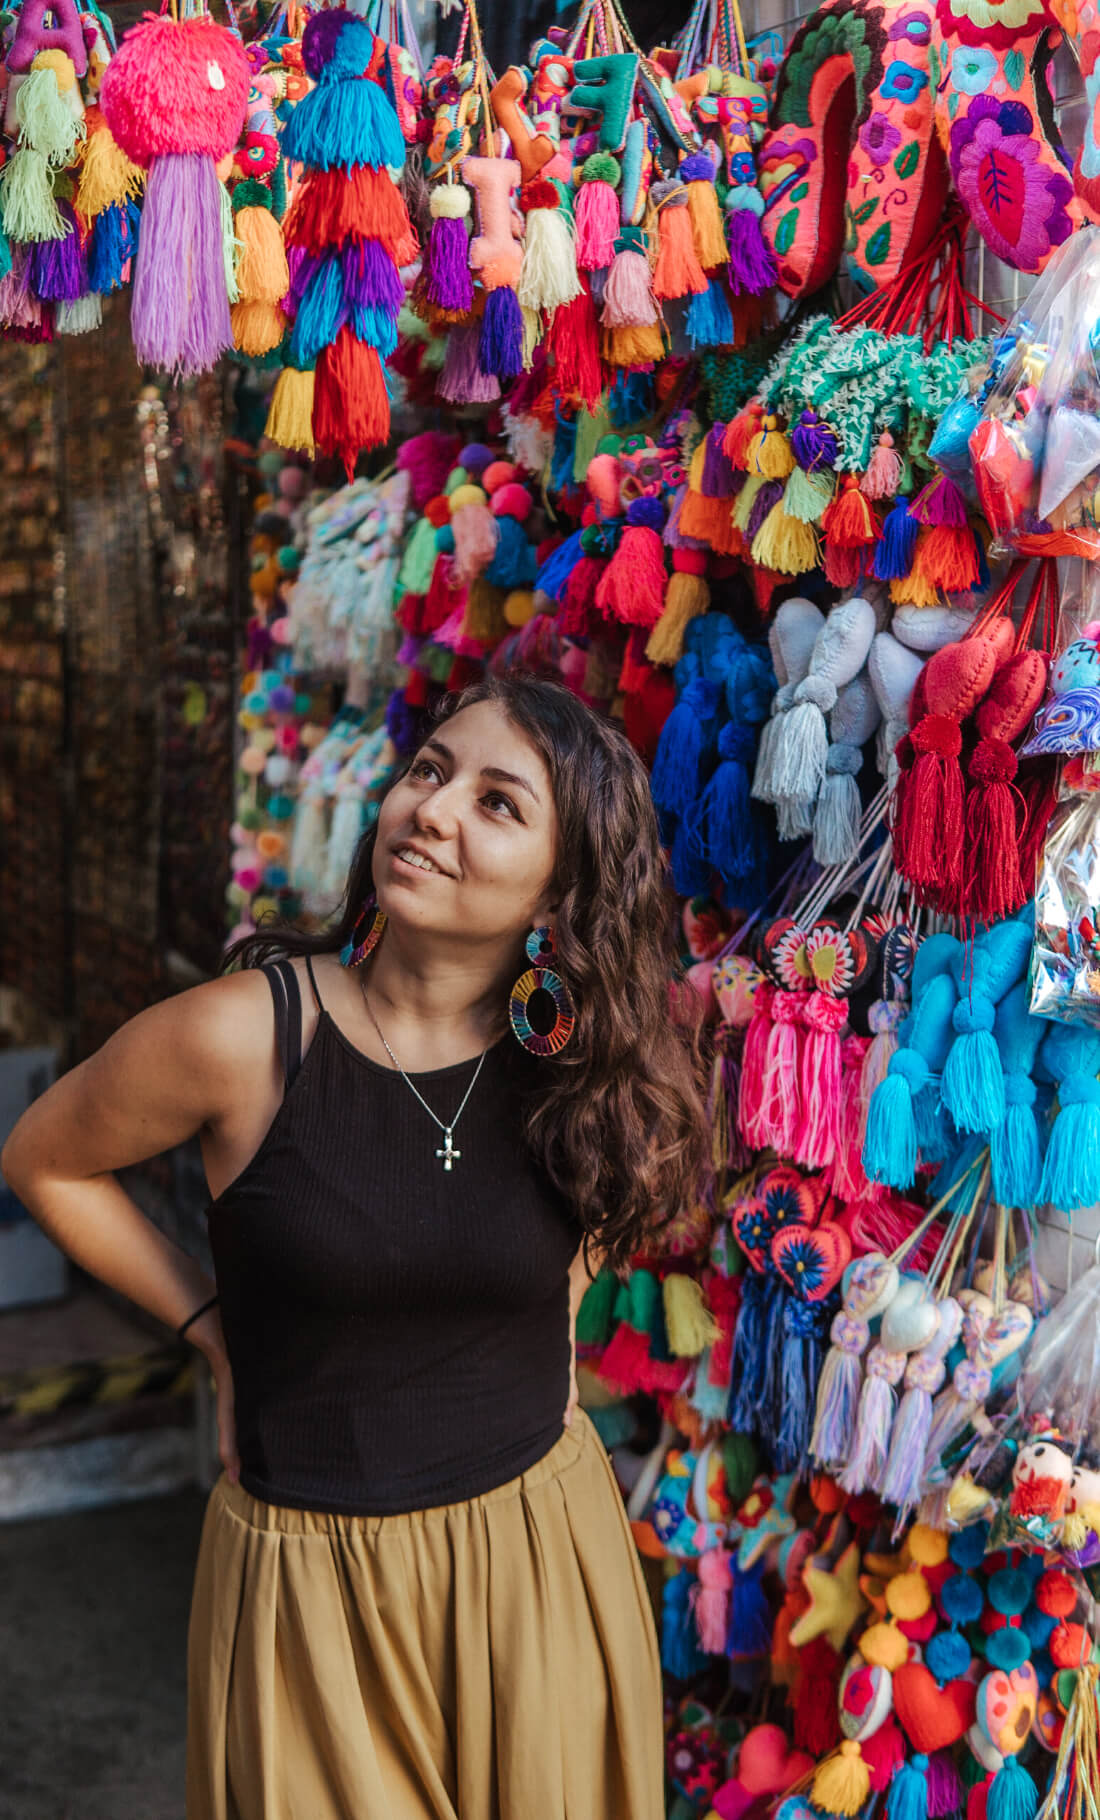 Stacey Valle standing in front of a colorful market vendor display